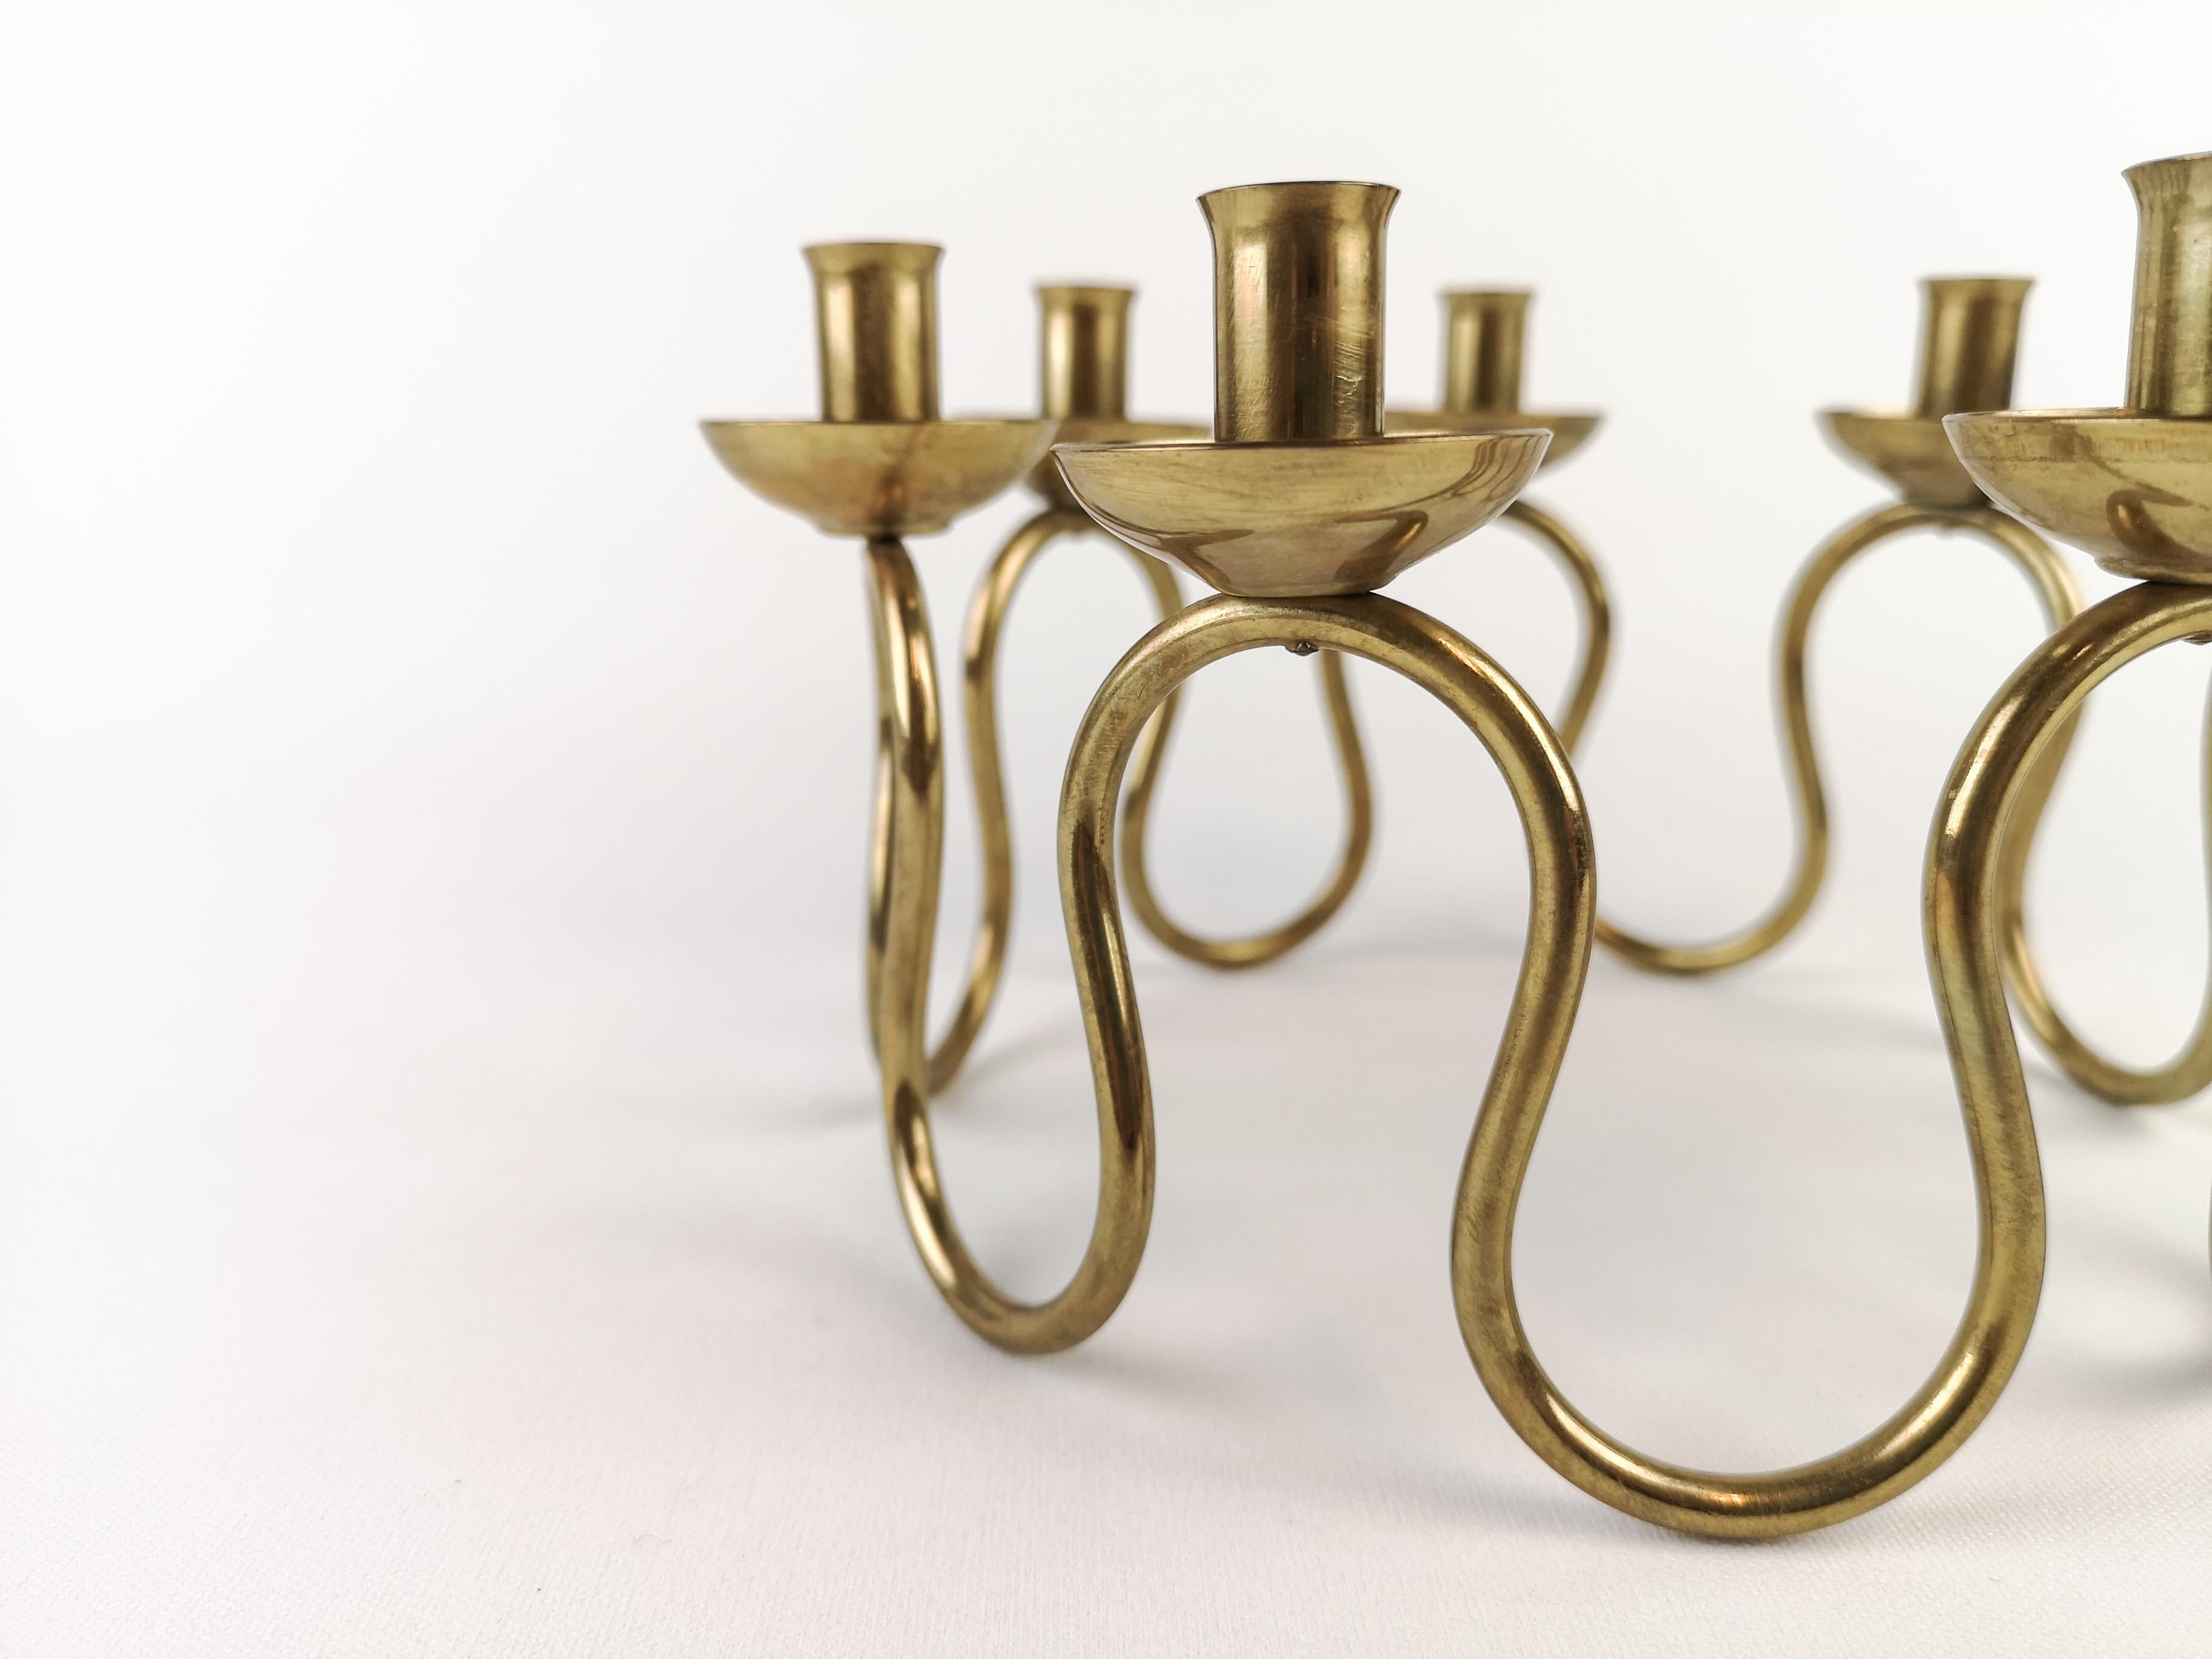 Brass candlestick designed by Lars Holmström. Produced by Lars Holmström in Arvika, Sweden.

Signs of ware and use.